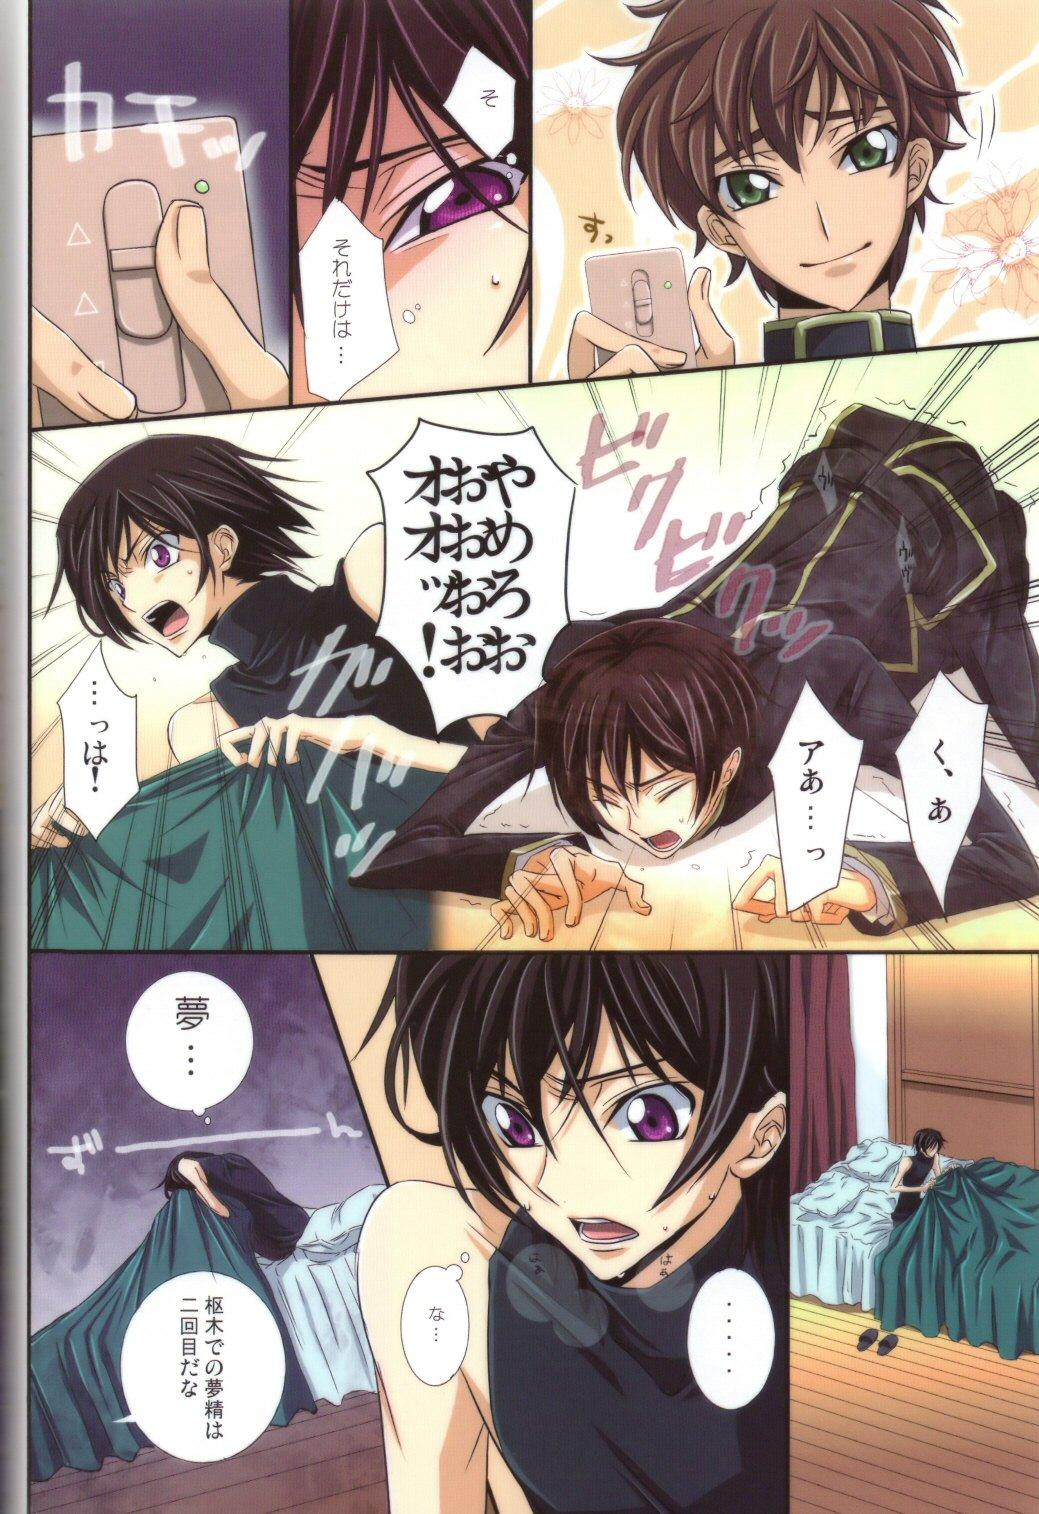 Stripping on・non・om - Code geass Casa - Page 3